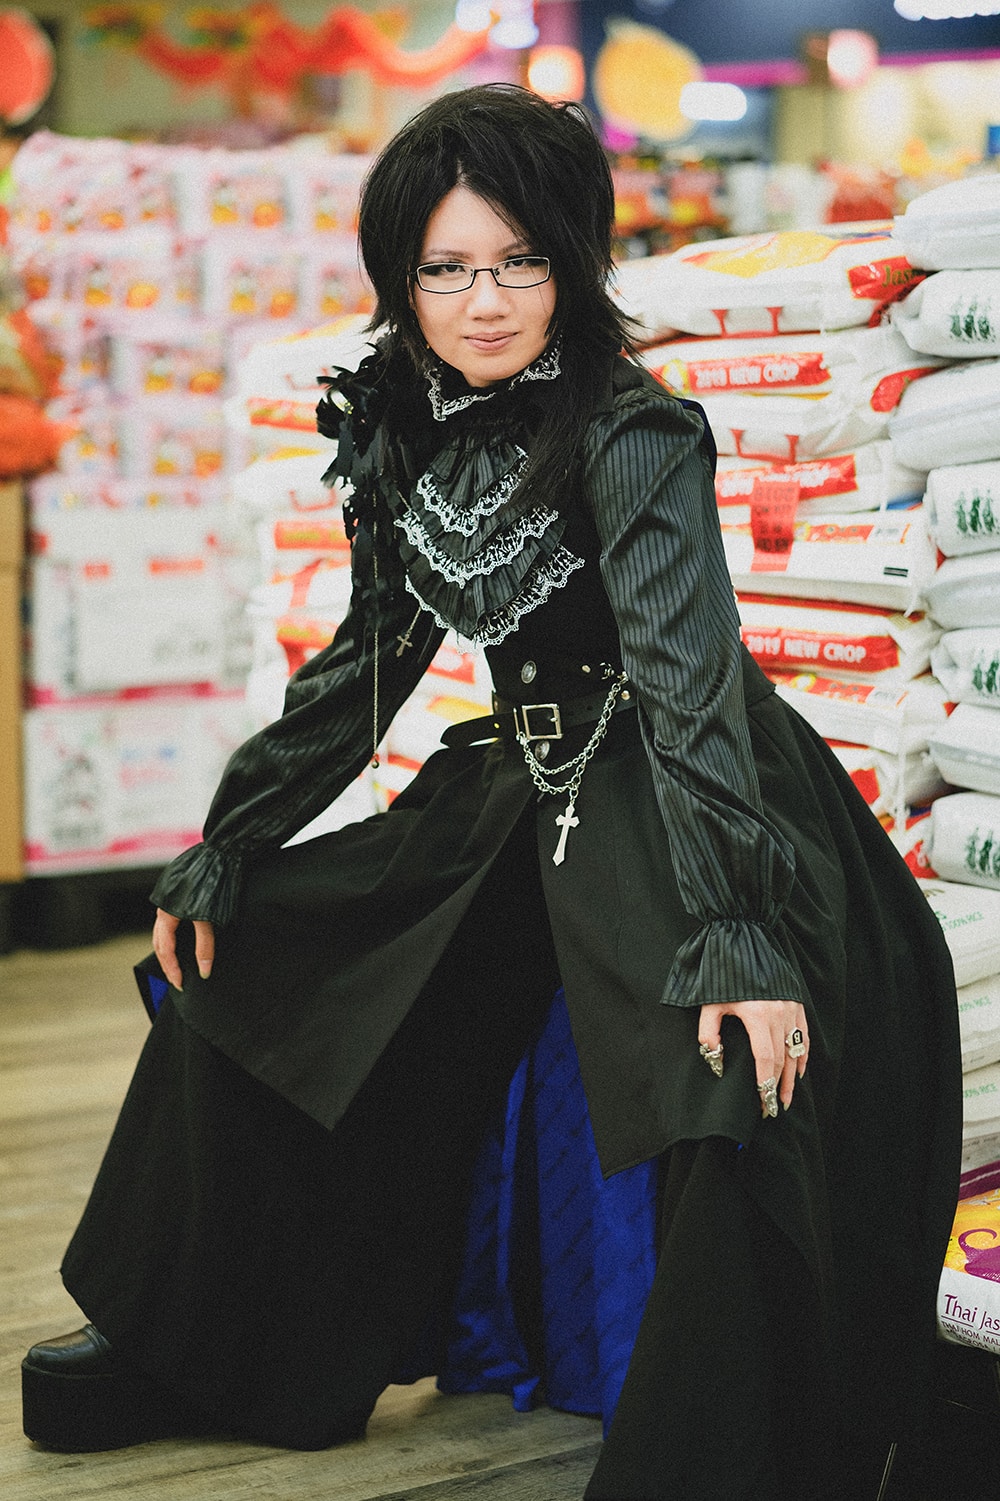 goth sitting on a bags of rice inside Asian grocery store.